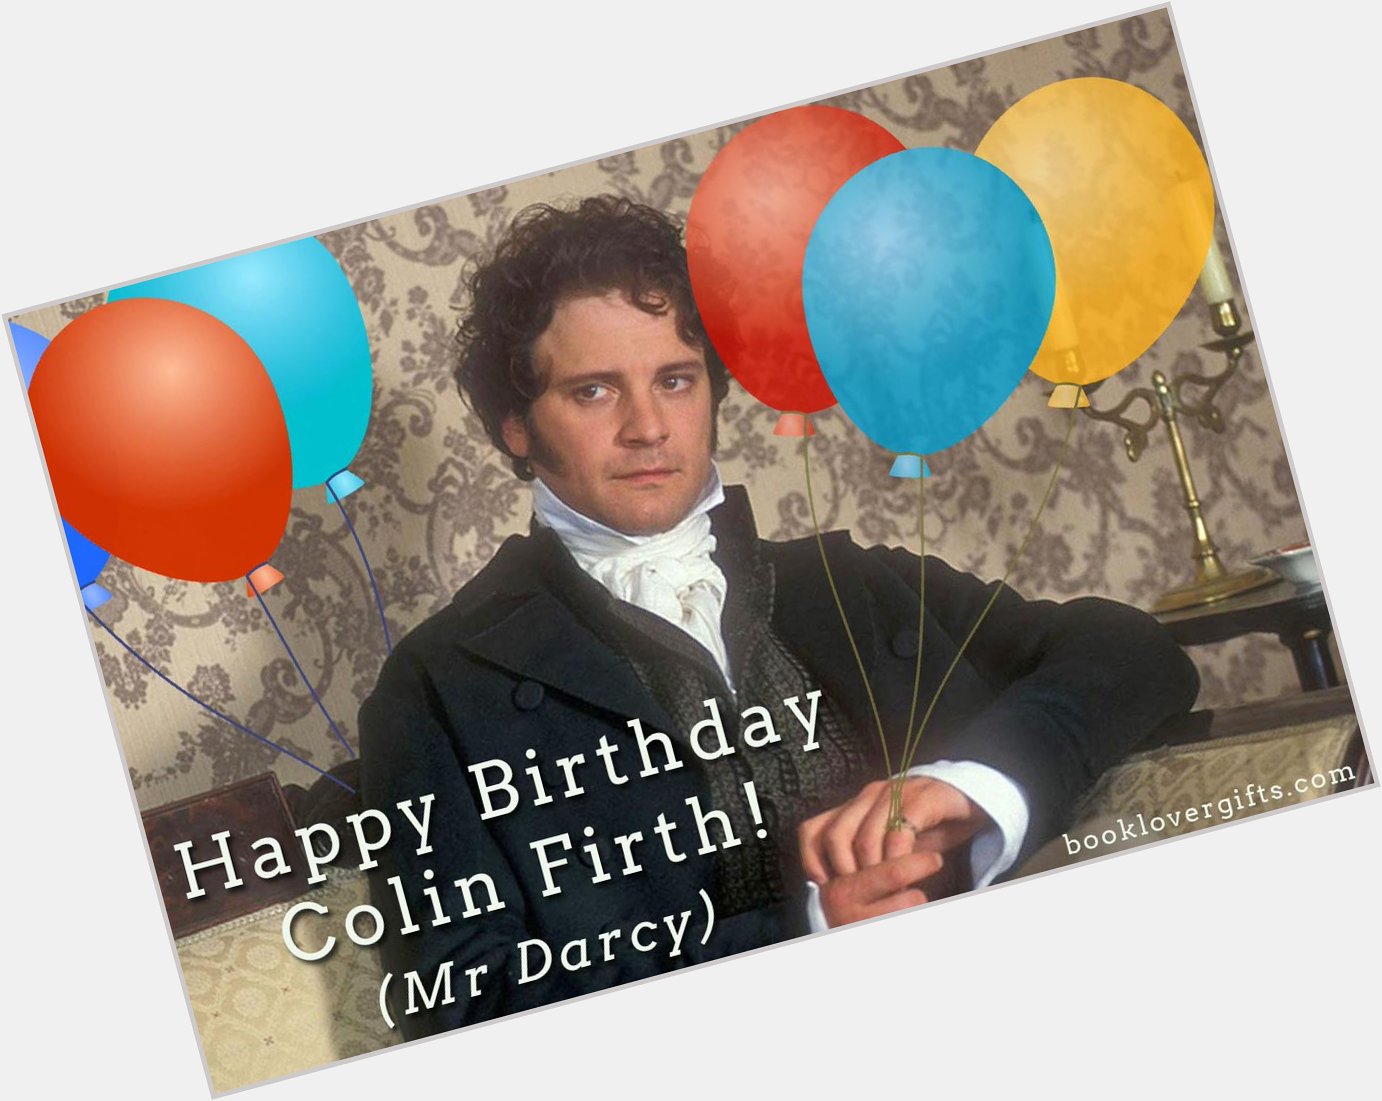 Happy Birthday Colin Firth / Darcy! Heard about his next film?  